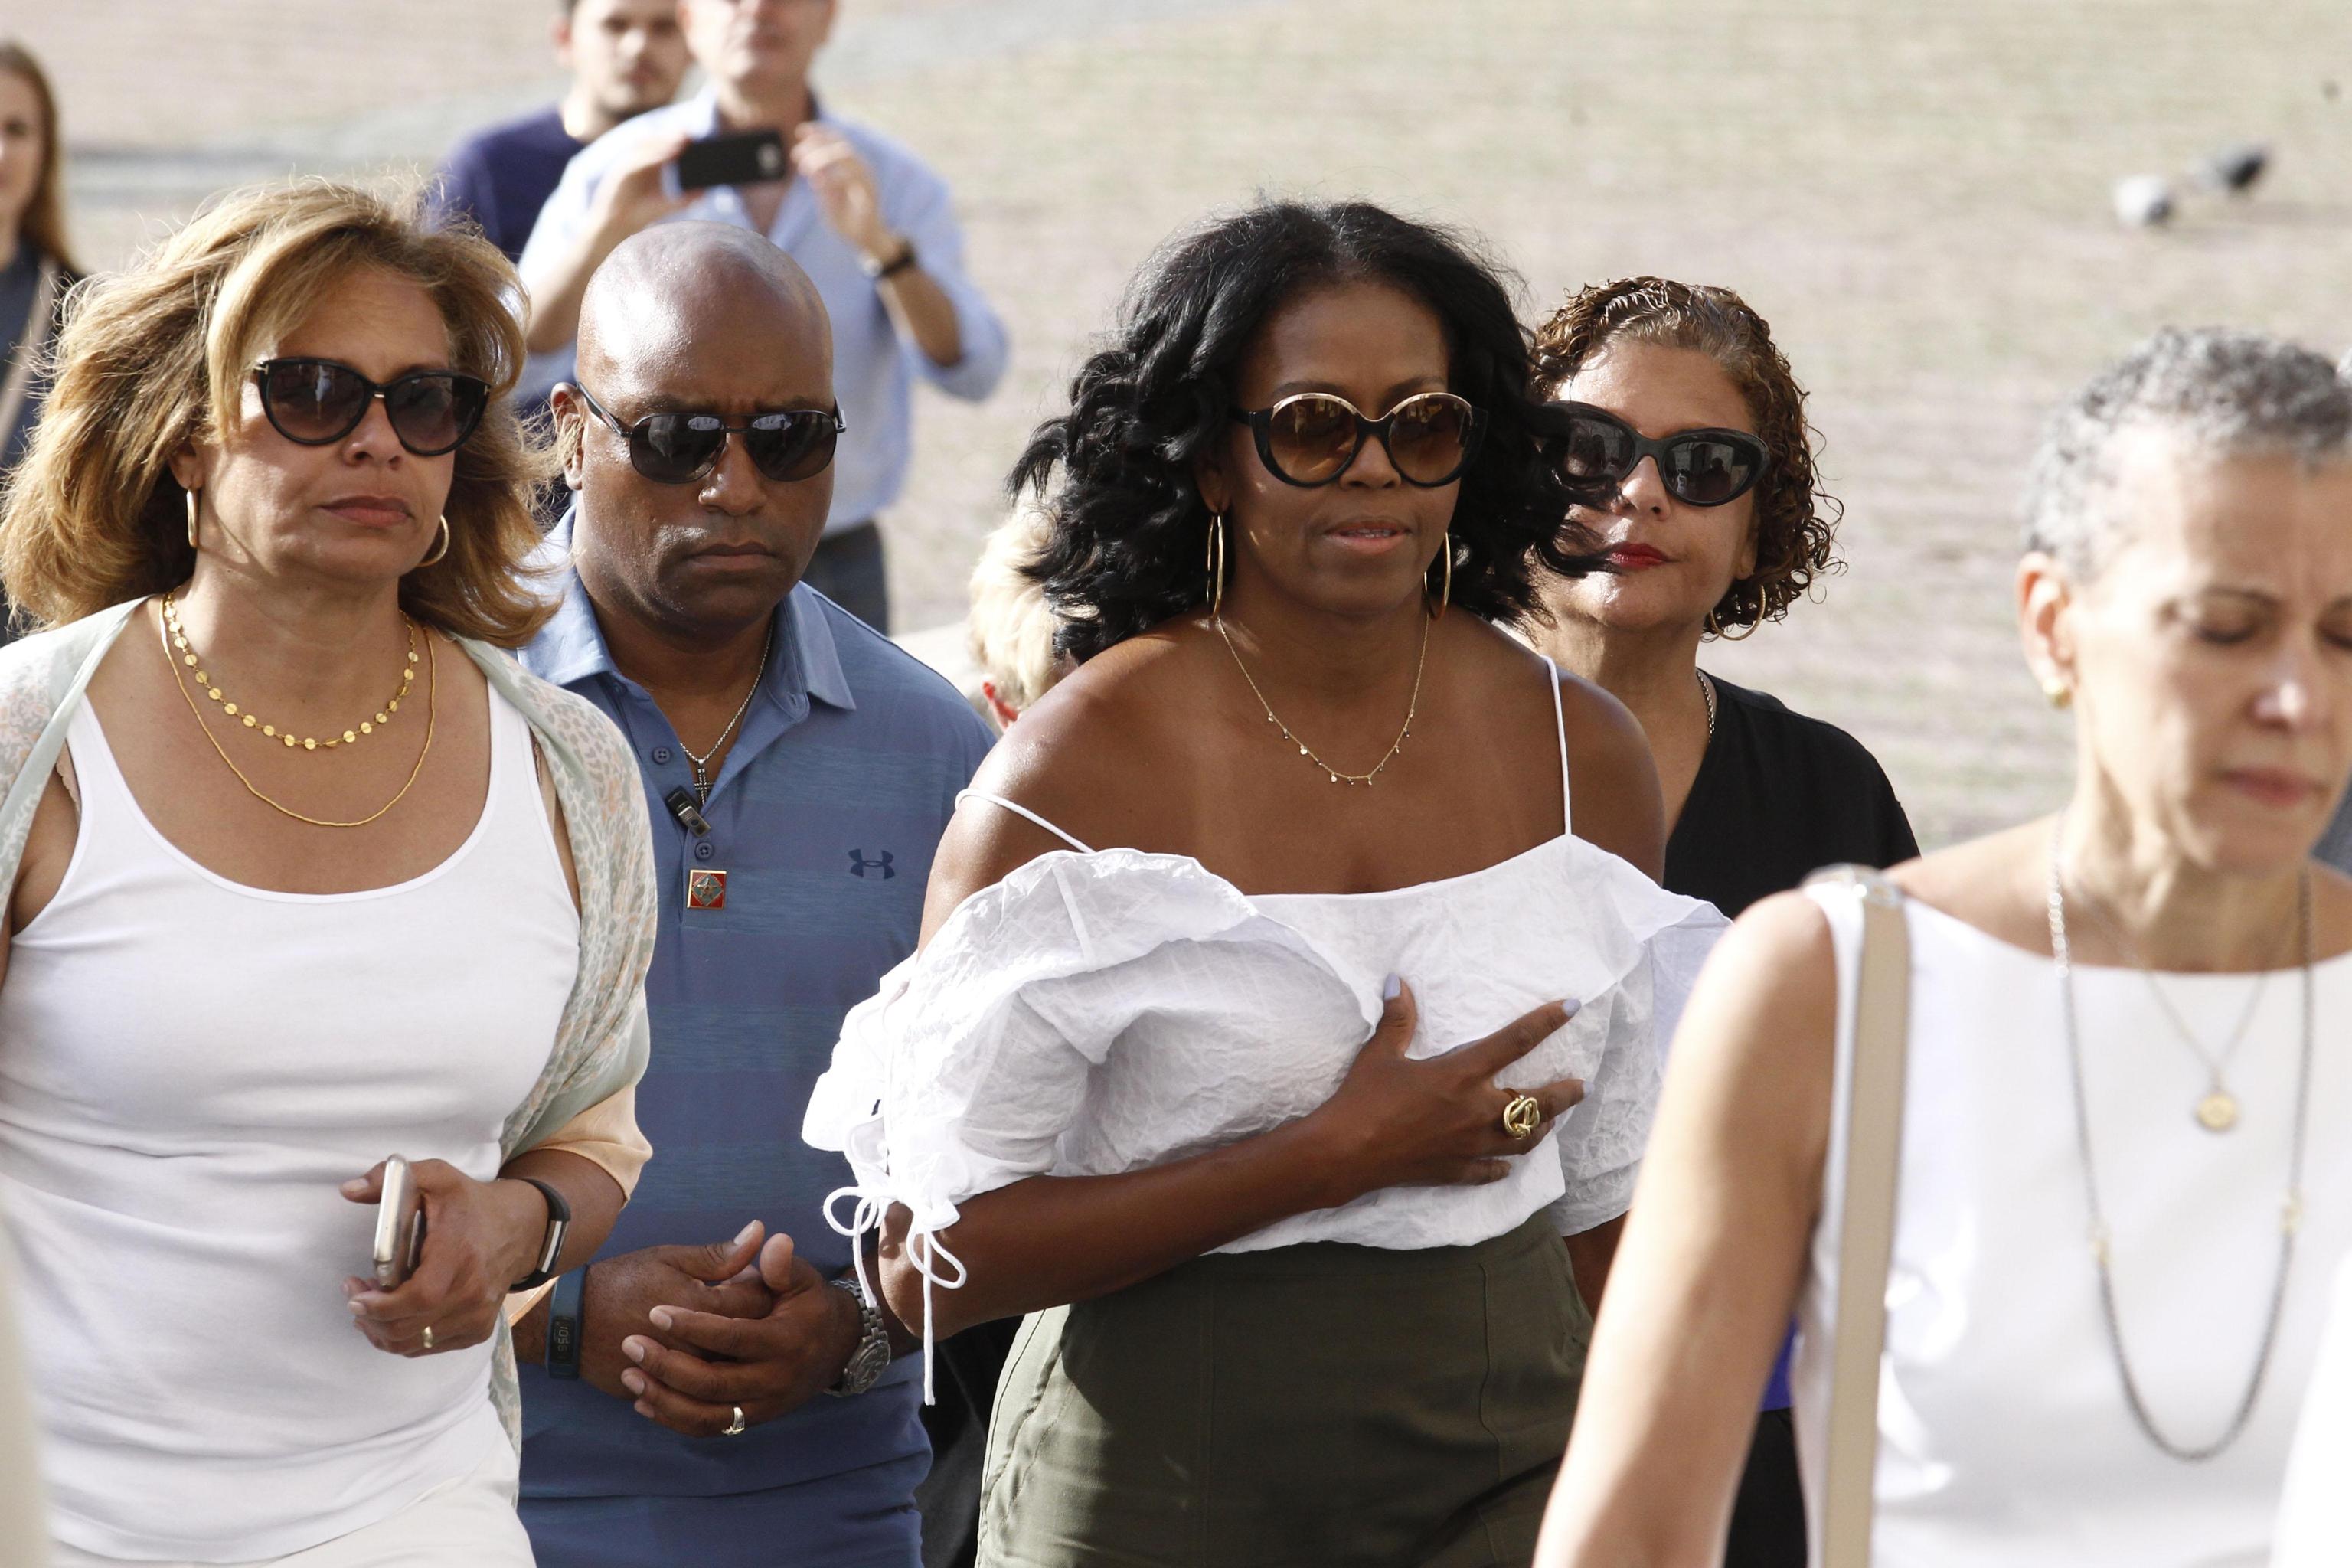 Michelle Obama’s Post White House Style is Truly Everything